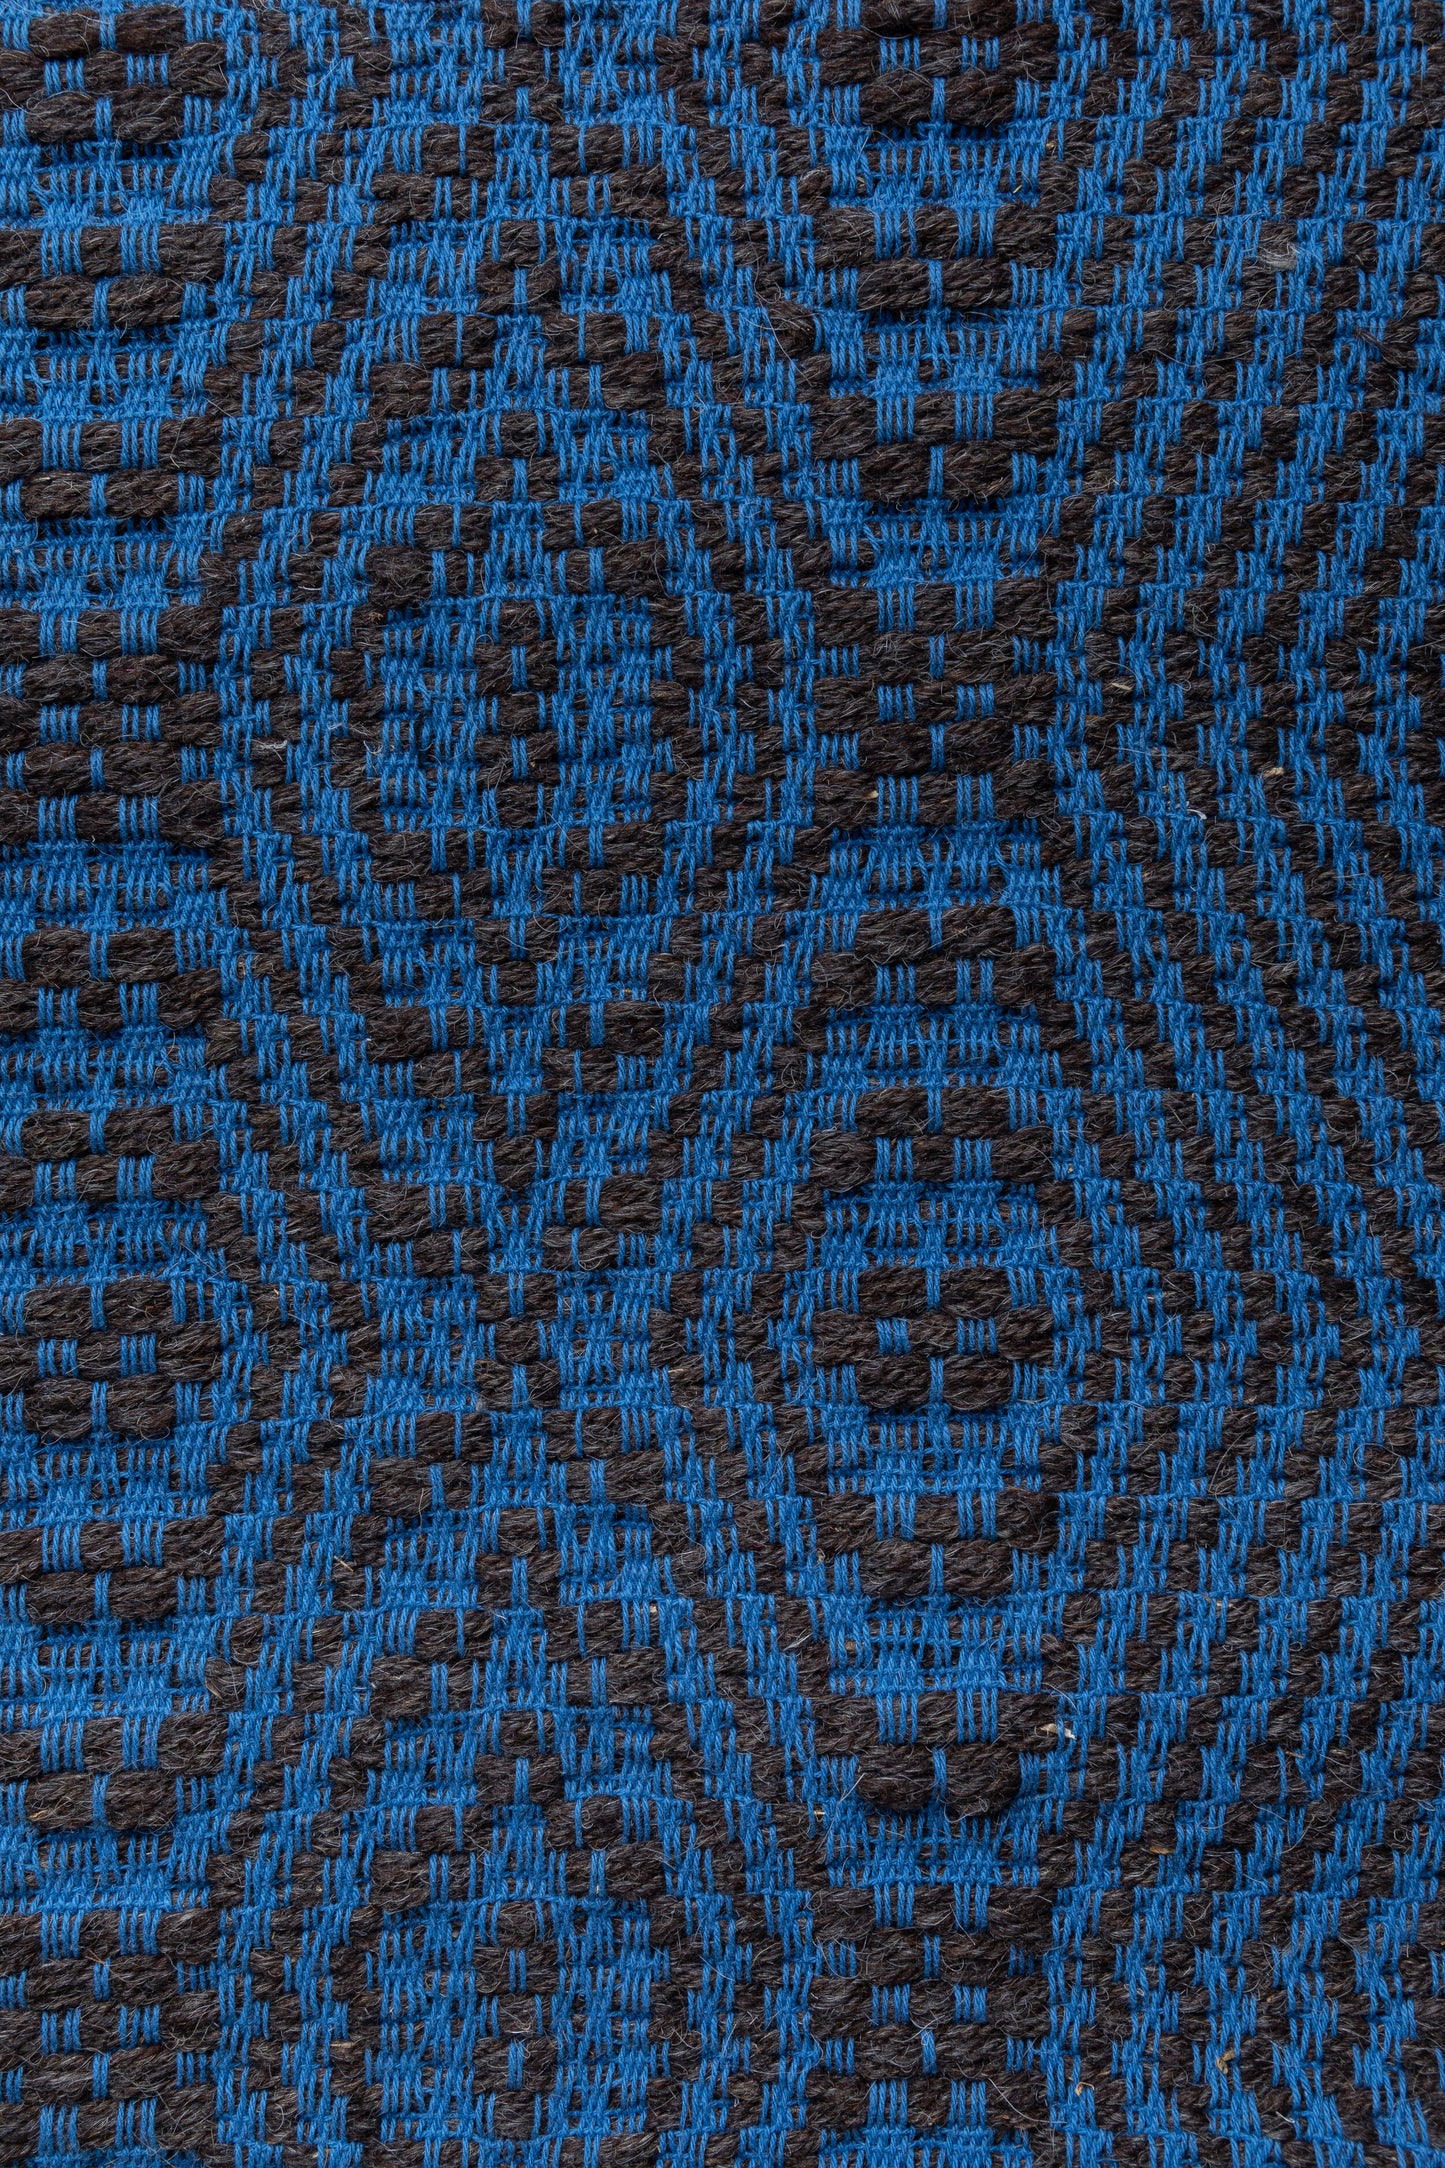 "Pinto melograno" Rug 80 x 190 cm in Royal Blue / Brown